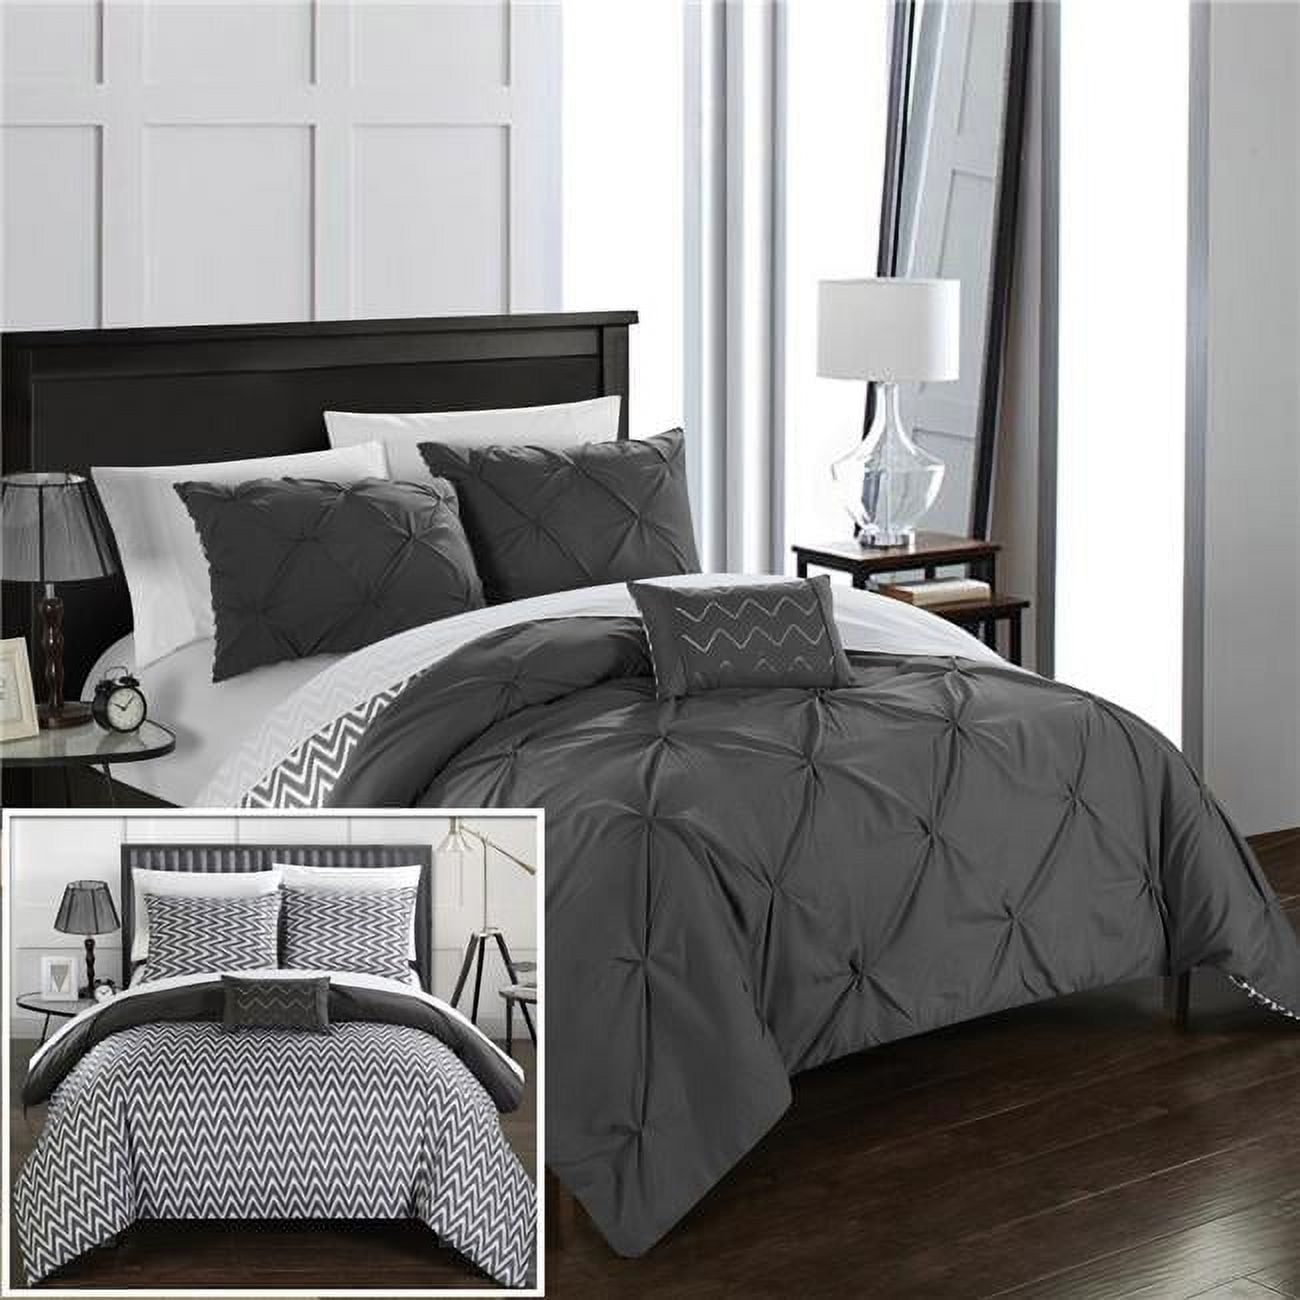 Everly Pinch Pleated, Reversible Chevron Print Ruffled & Pleated Complete Bed In A Bag Comforter Set With Sheets - Grey - King - 8 Piece